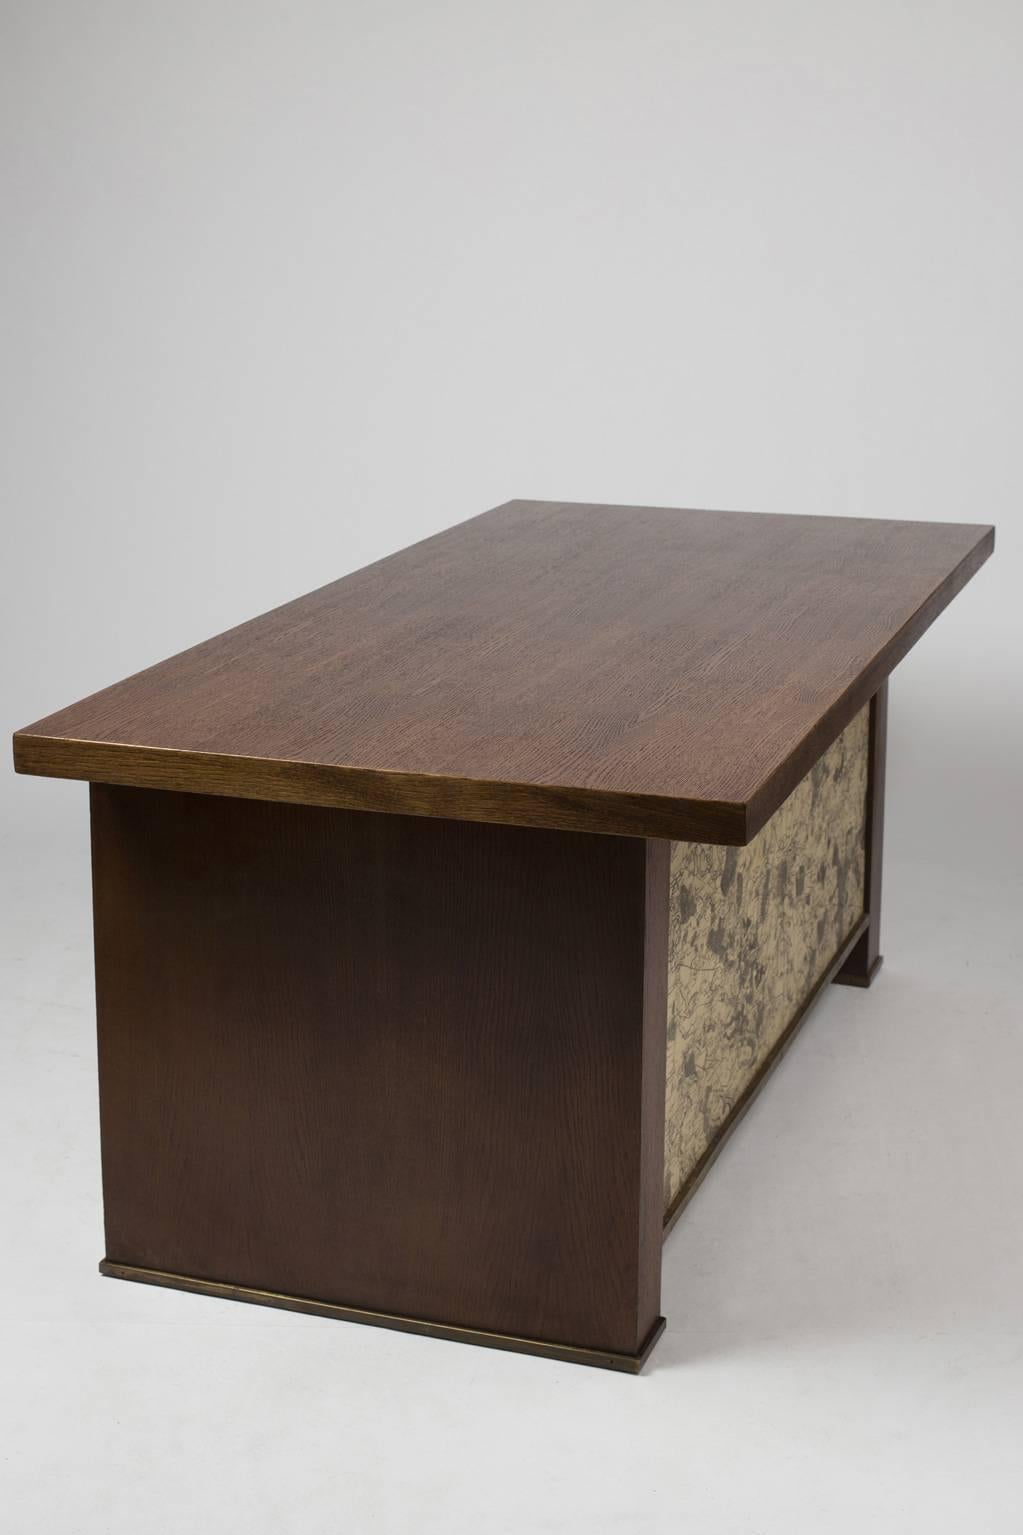 Varnished 1940s Desk in Oak and Brass with an Ancient Map of Paris and Suburb in Front